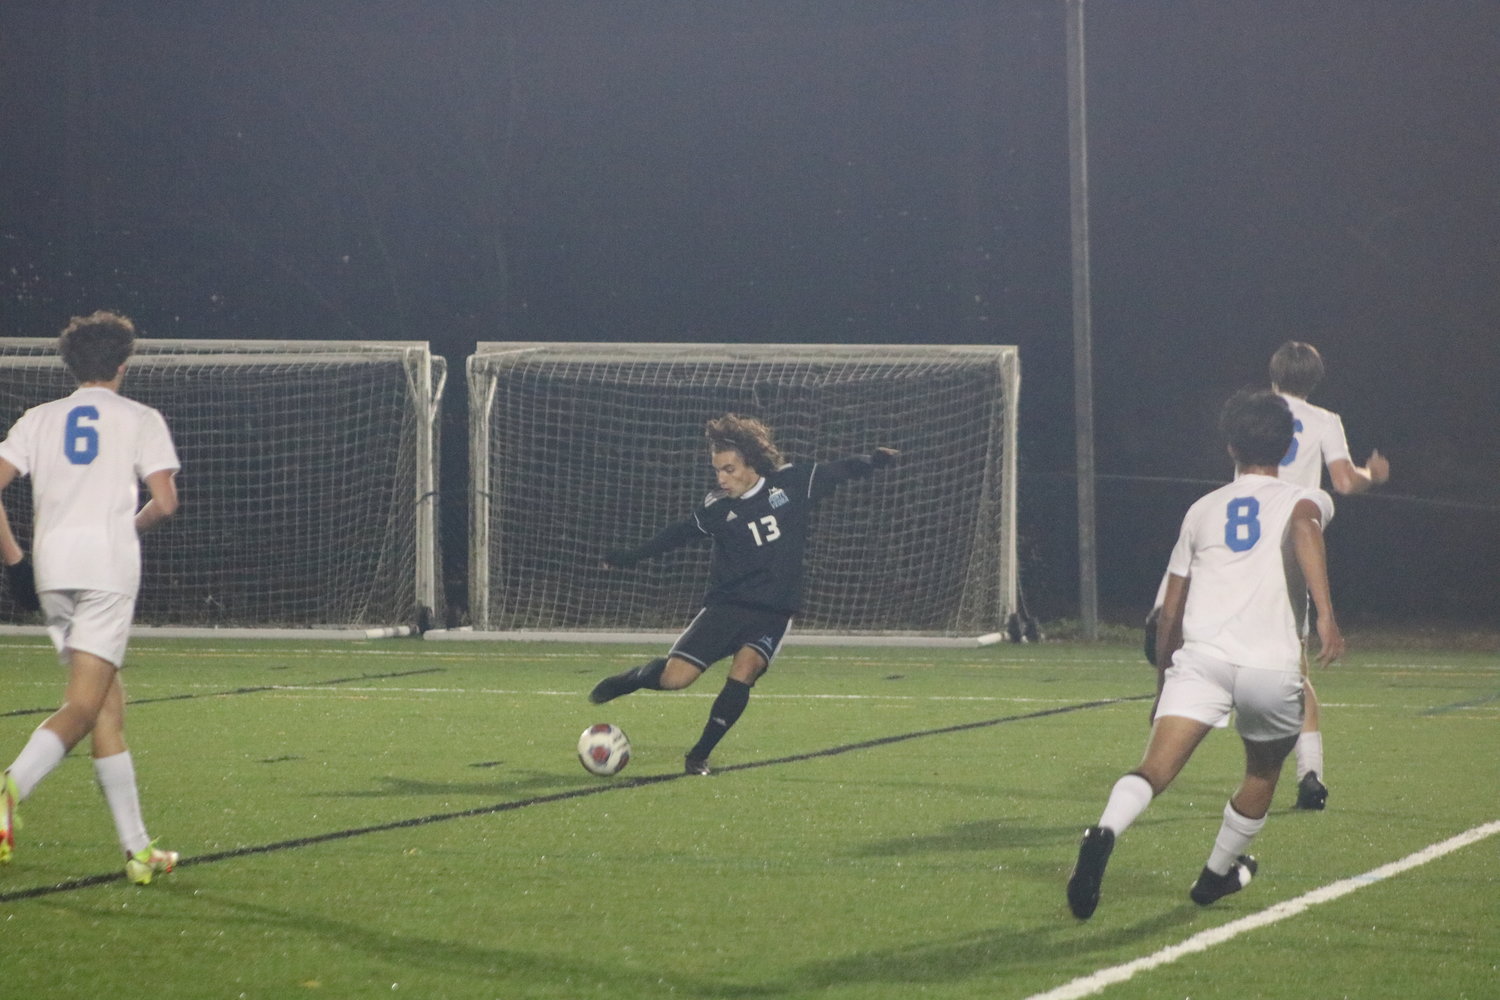 Andres Villasana winds up to shoot the first Ponte Vedra goal of the regional quarterfinal contest.